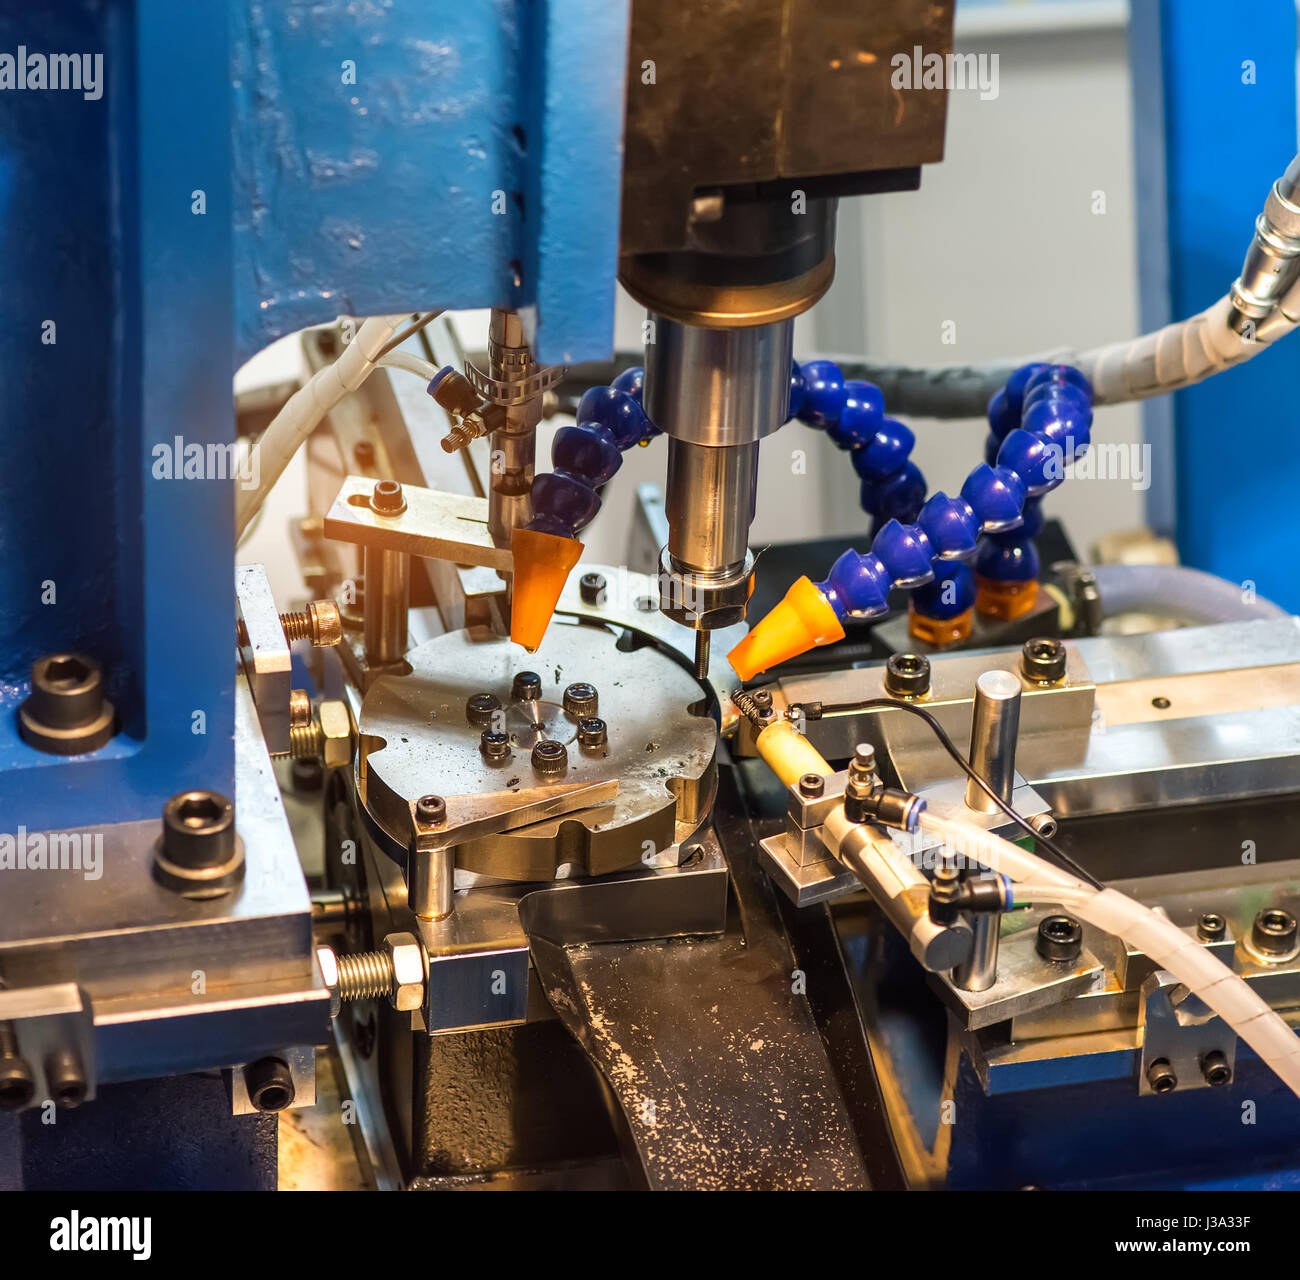 CNC turning machine drilling process in metal industry Stock Photo